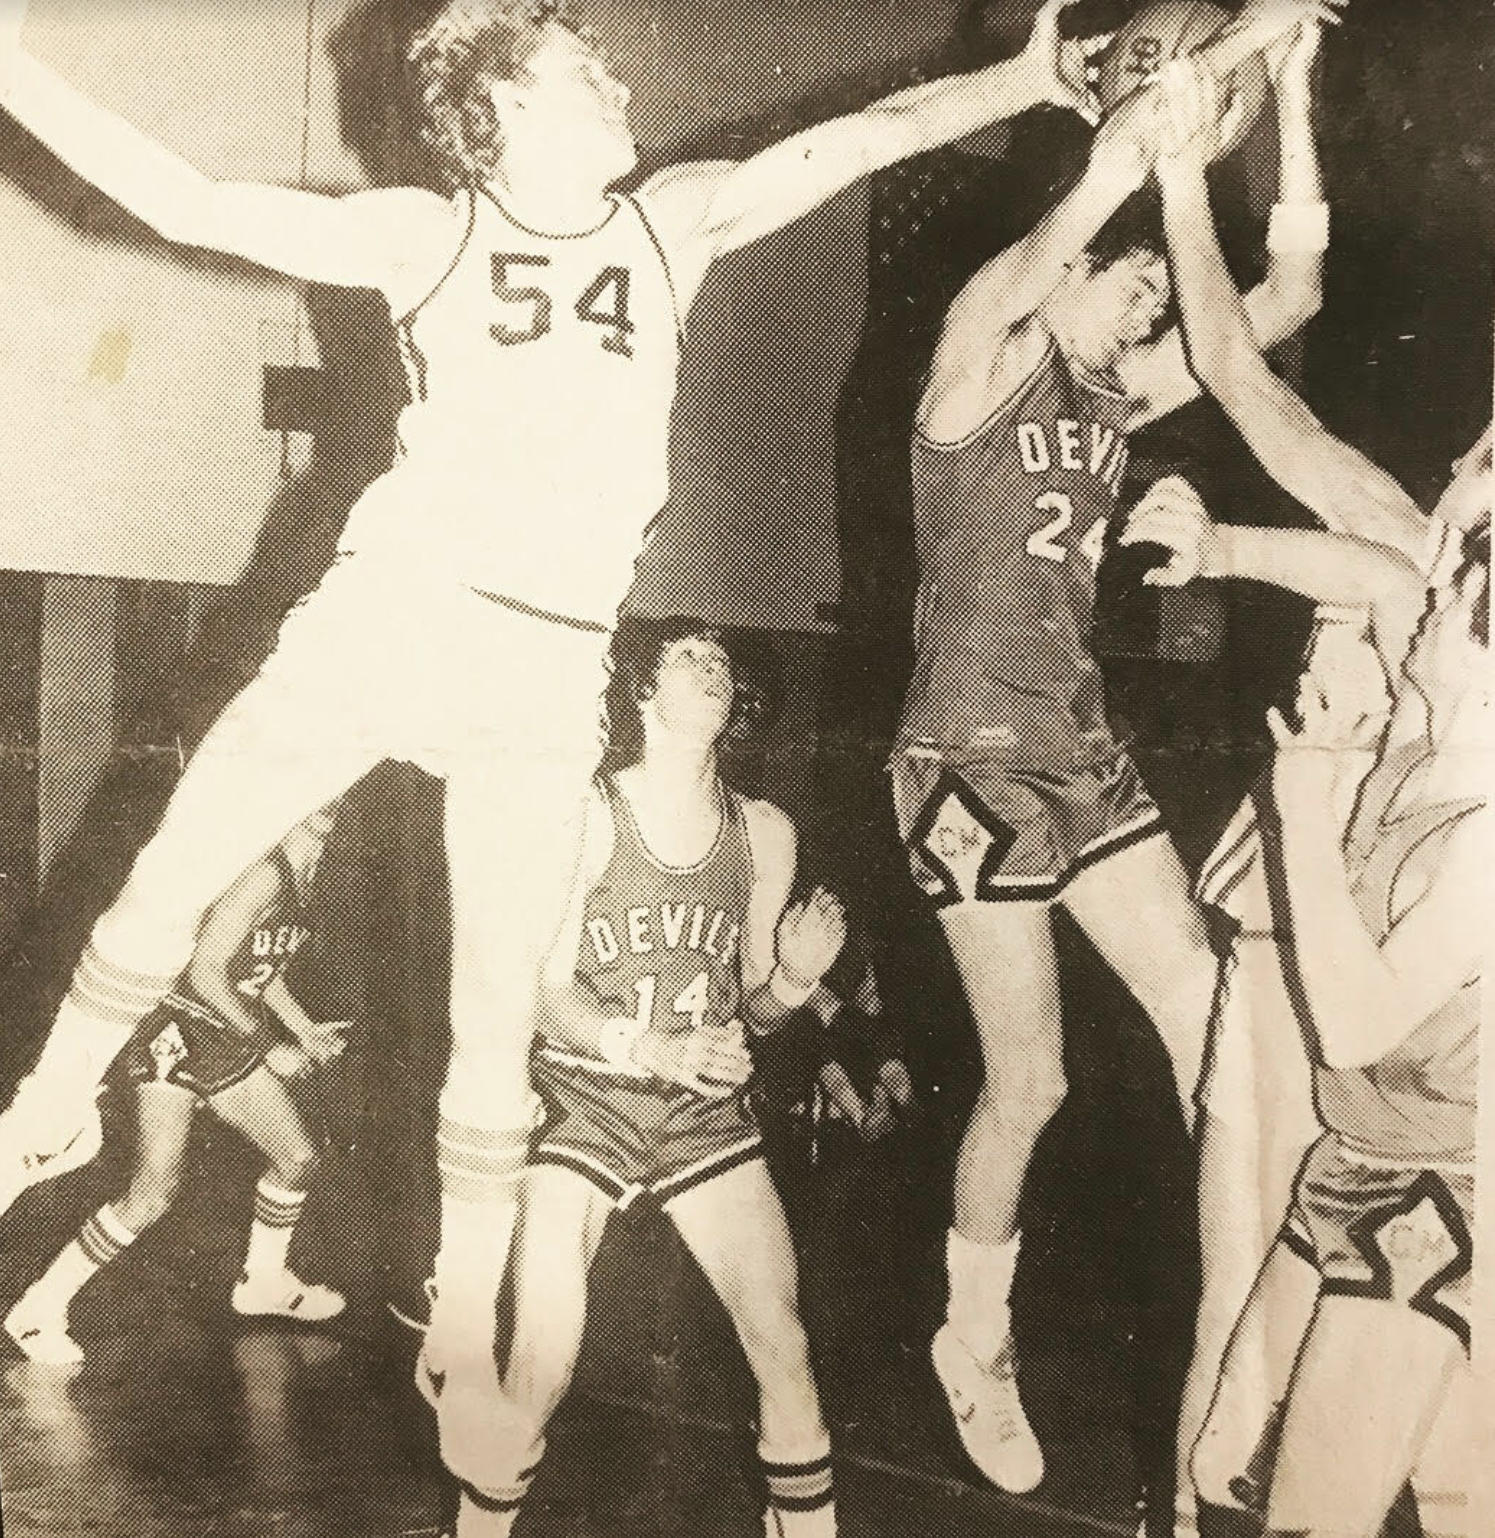 Art Jones playing basketball, he attended Hamilton College on a basketball scholarship.